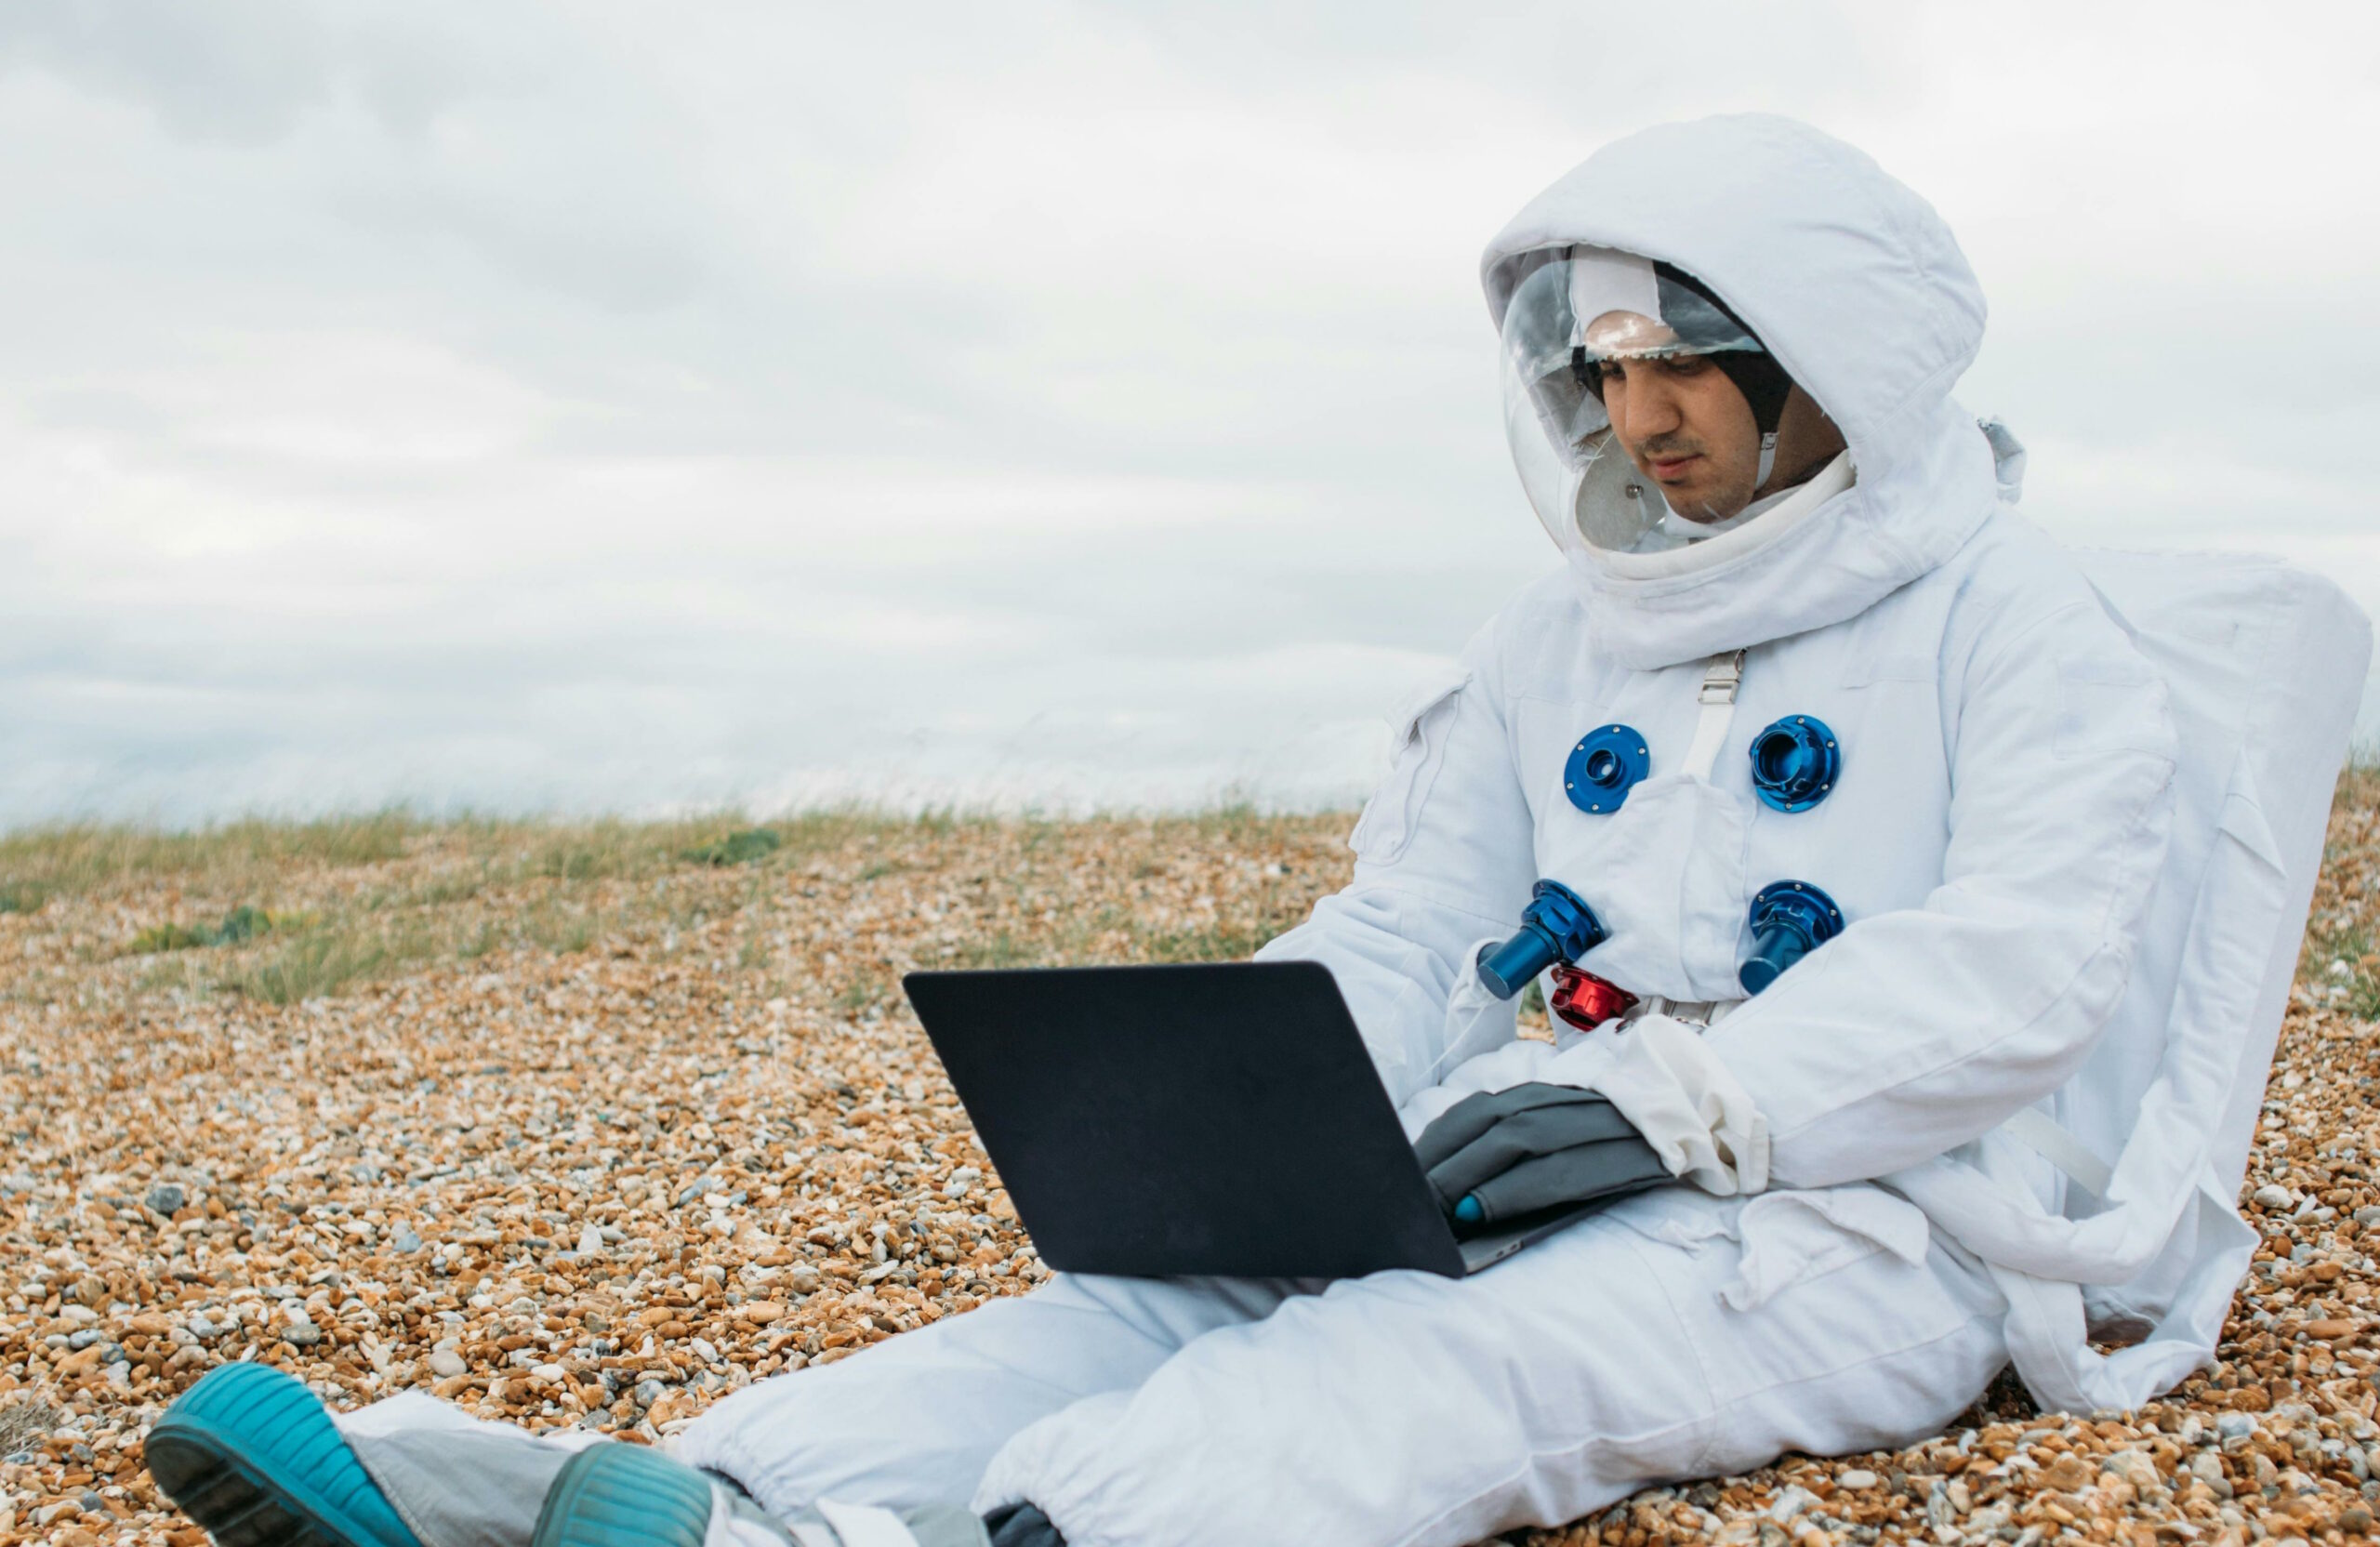 A white man wearing a spacesuit sits on a pebble beach using a laptop.